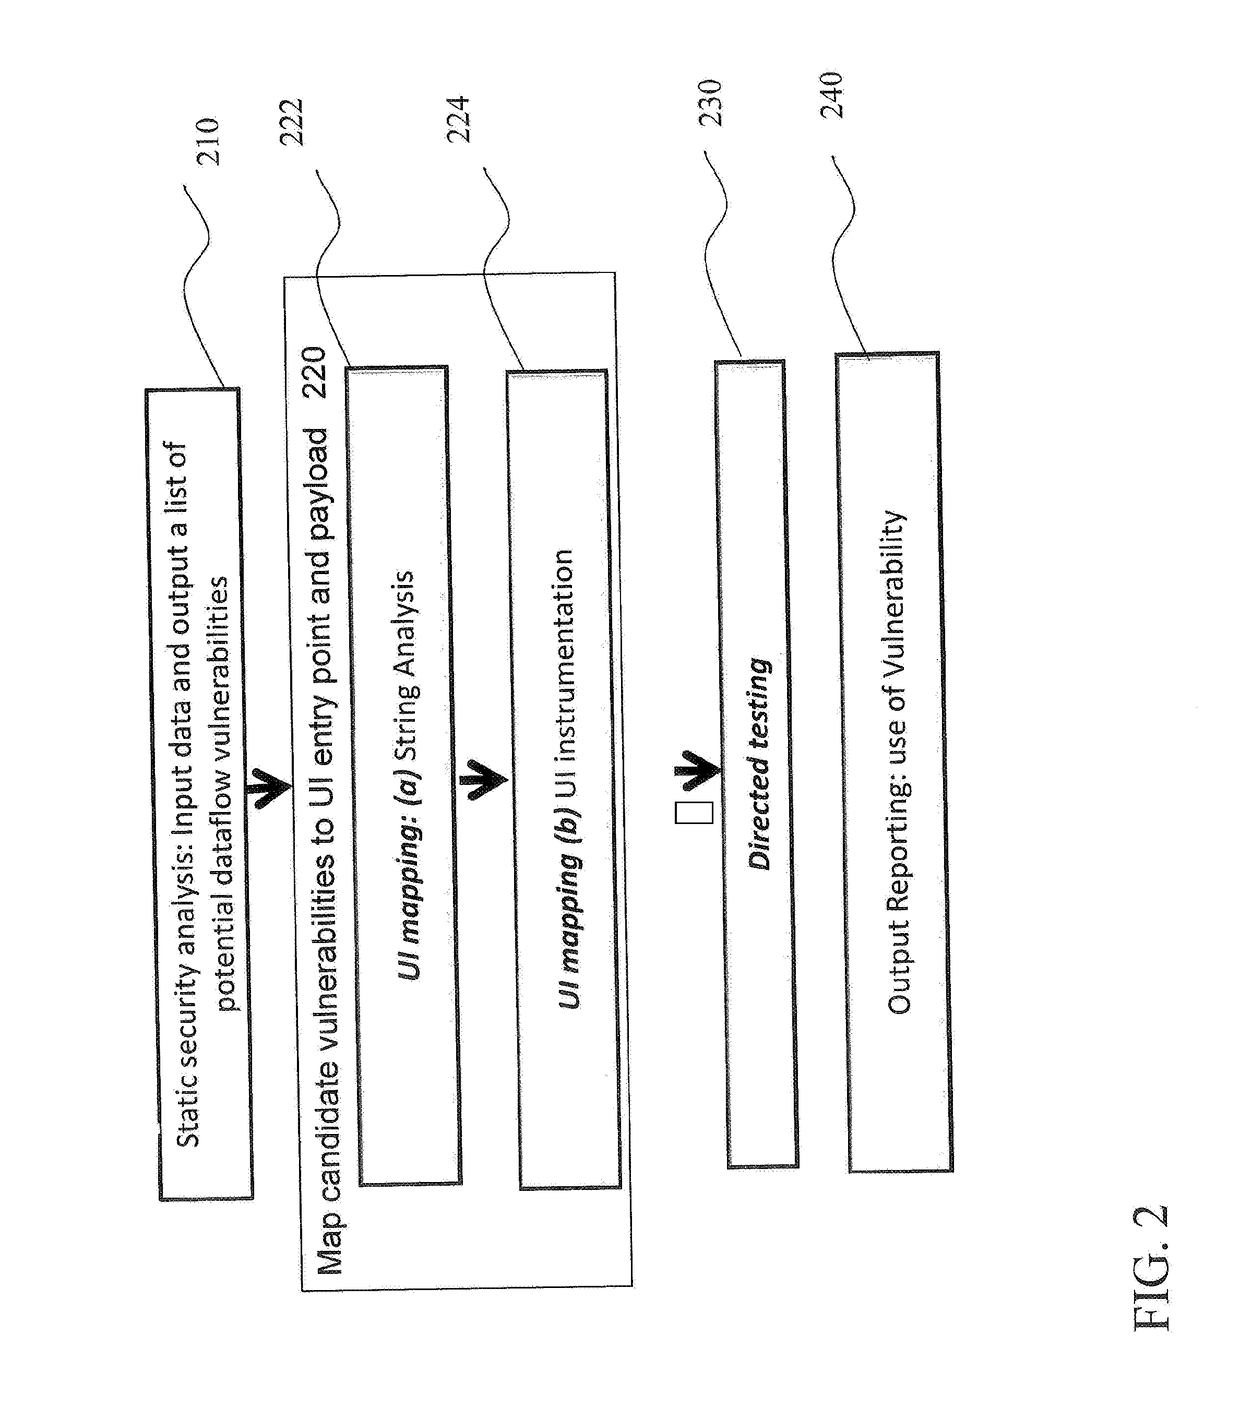 System, method and apparatus for fully precise hybrid security verification of mobile applications